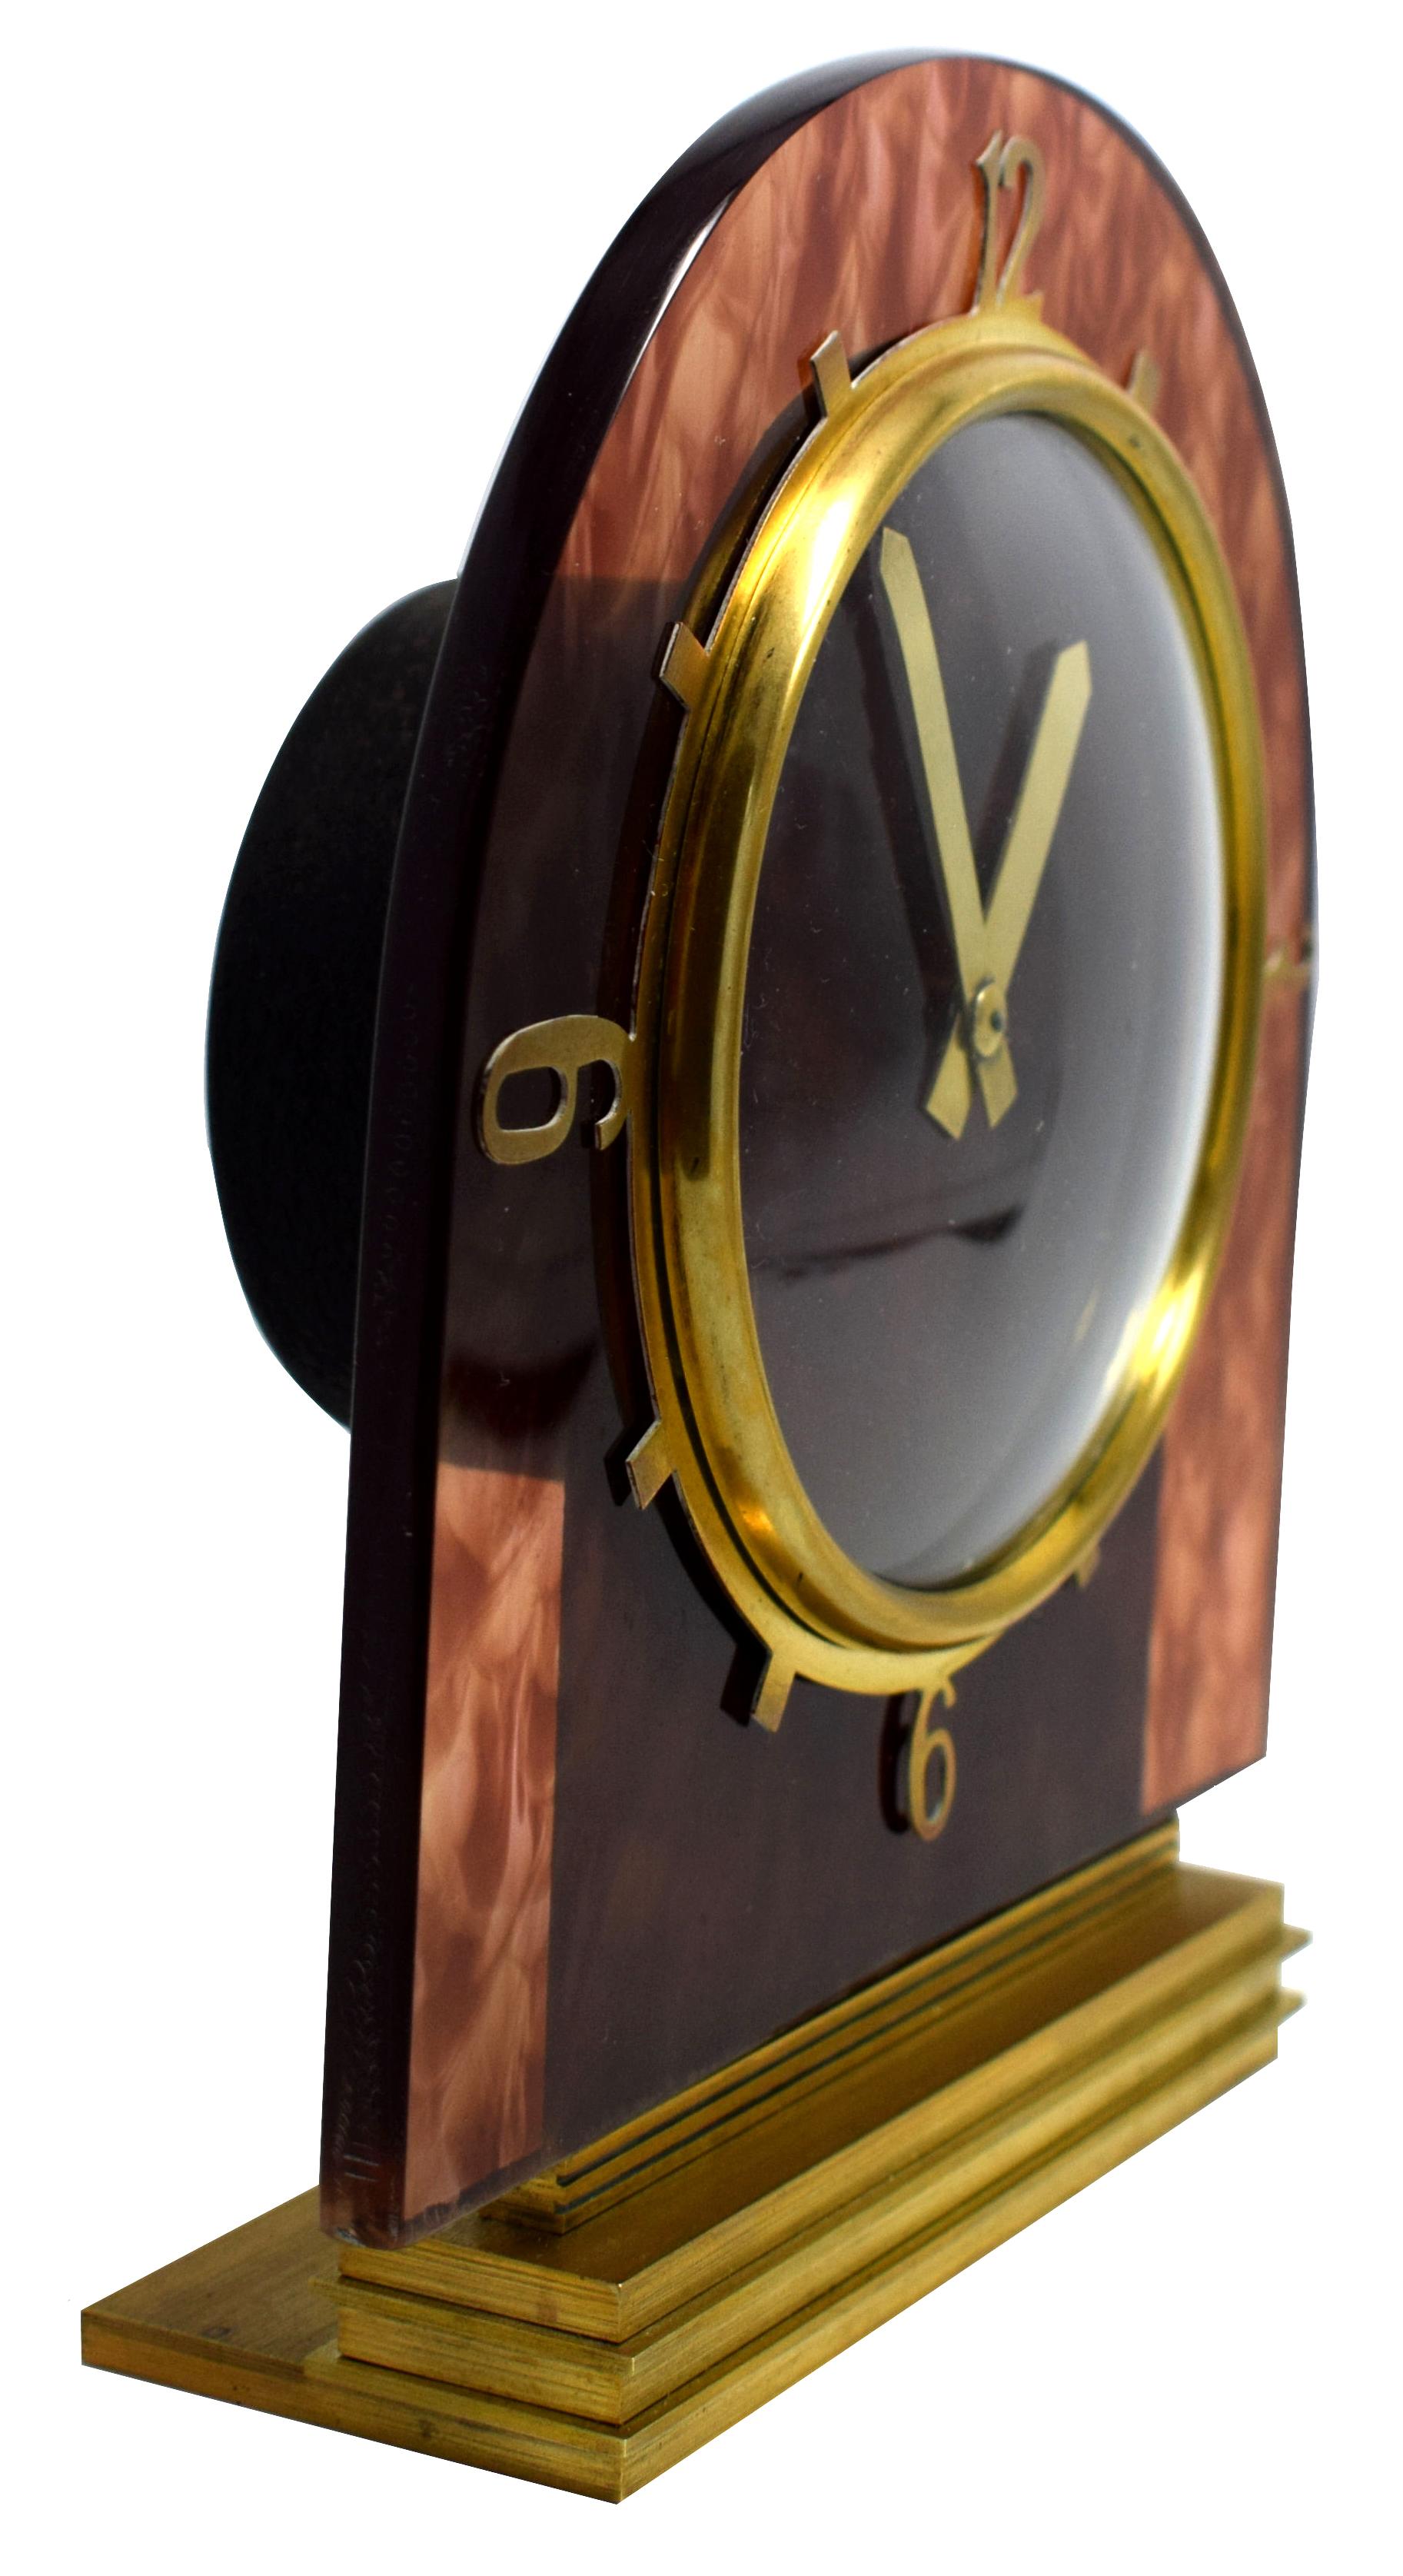 Very attractive, compact desk clock from the early 1930s utilising early faux tortoiseshell Lucite and a Fine mechanical movement providing good timekeeping. Eight day movement which has been recently and professionally serviced. Stepped solid brass